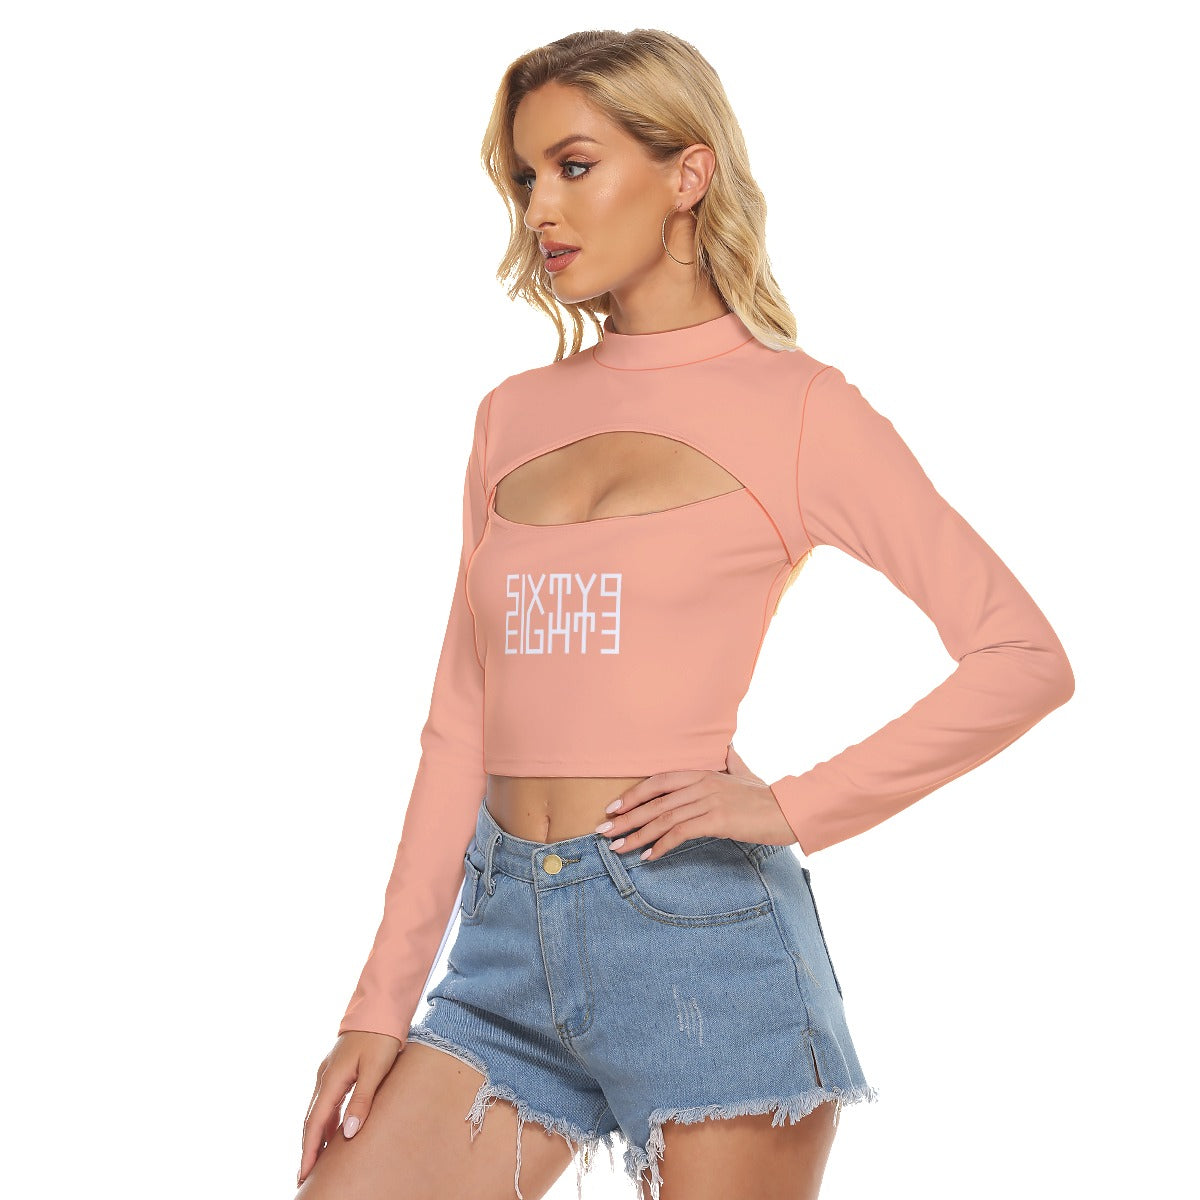 Sixty Eight 93 Logo White Peach Women's Hollow Chest Keyhole Tight Crop Top